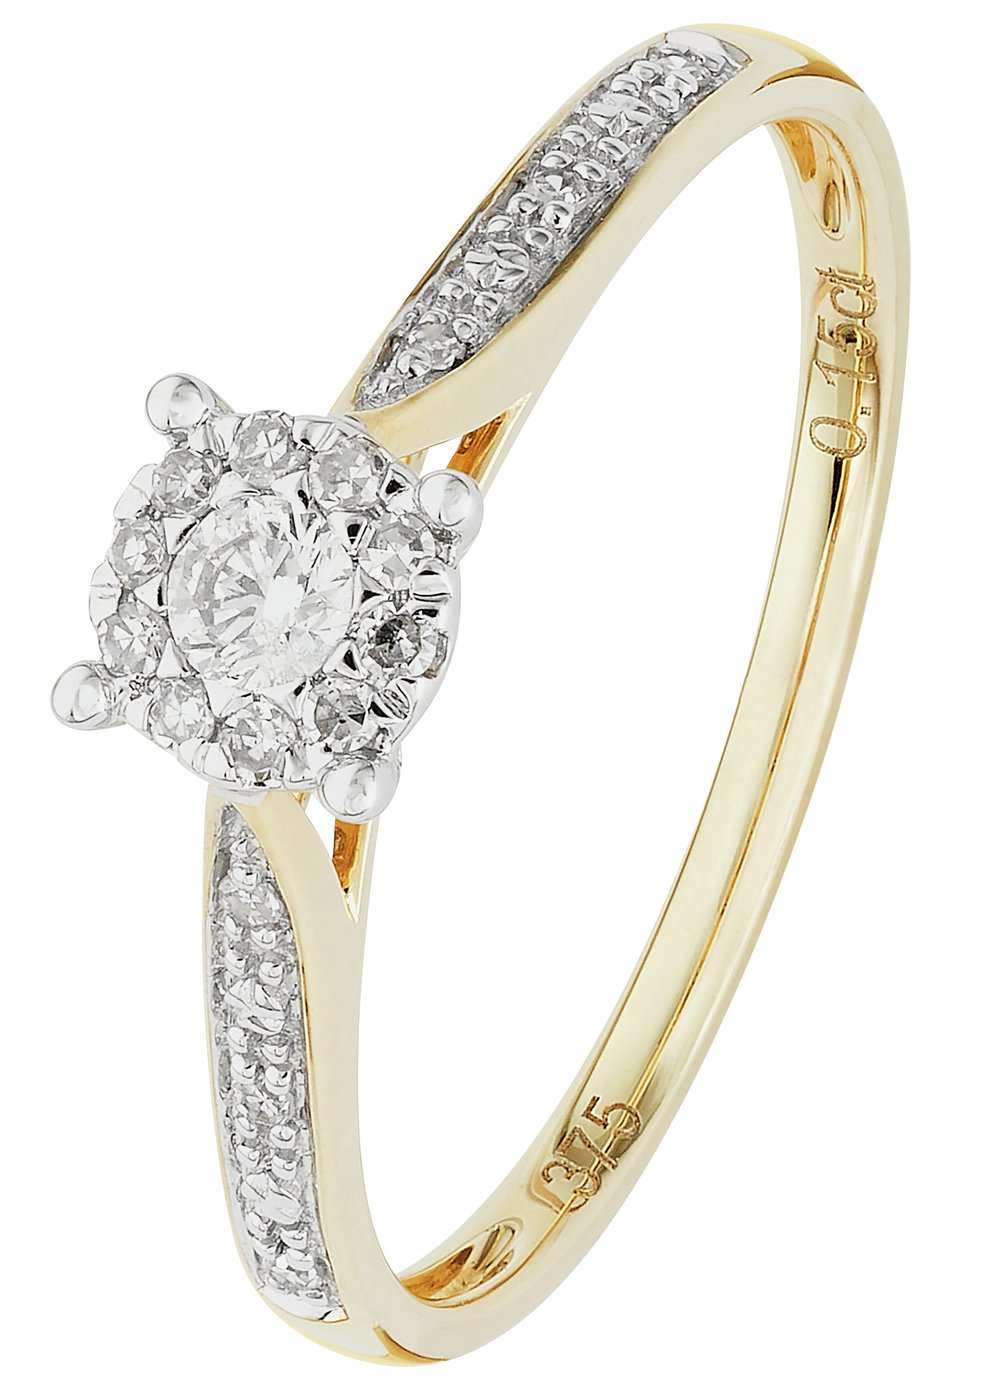 Revere 9ct Gold 0.15ct Diamond Solitaire Engagement Ring - N